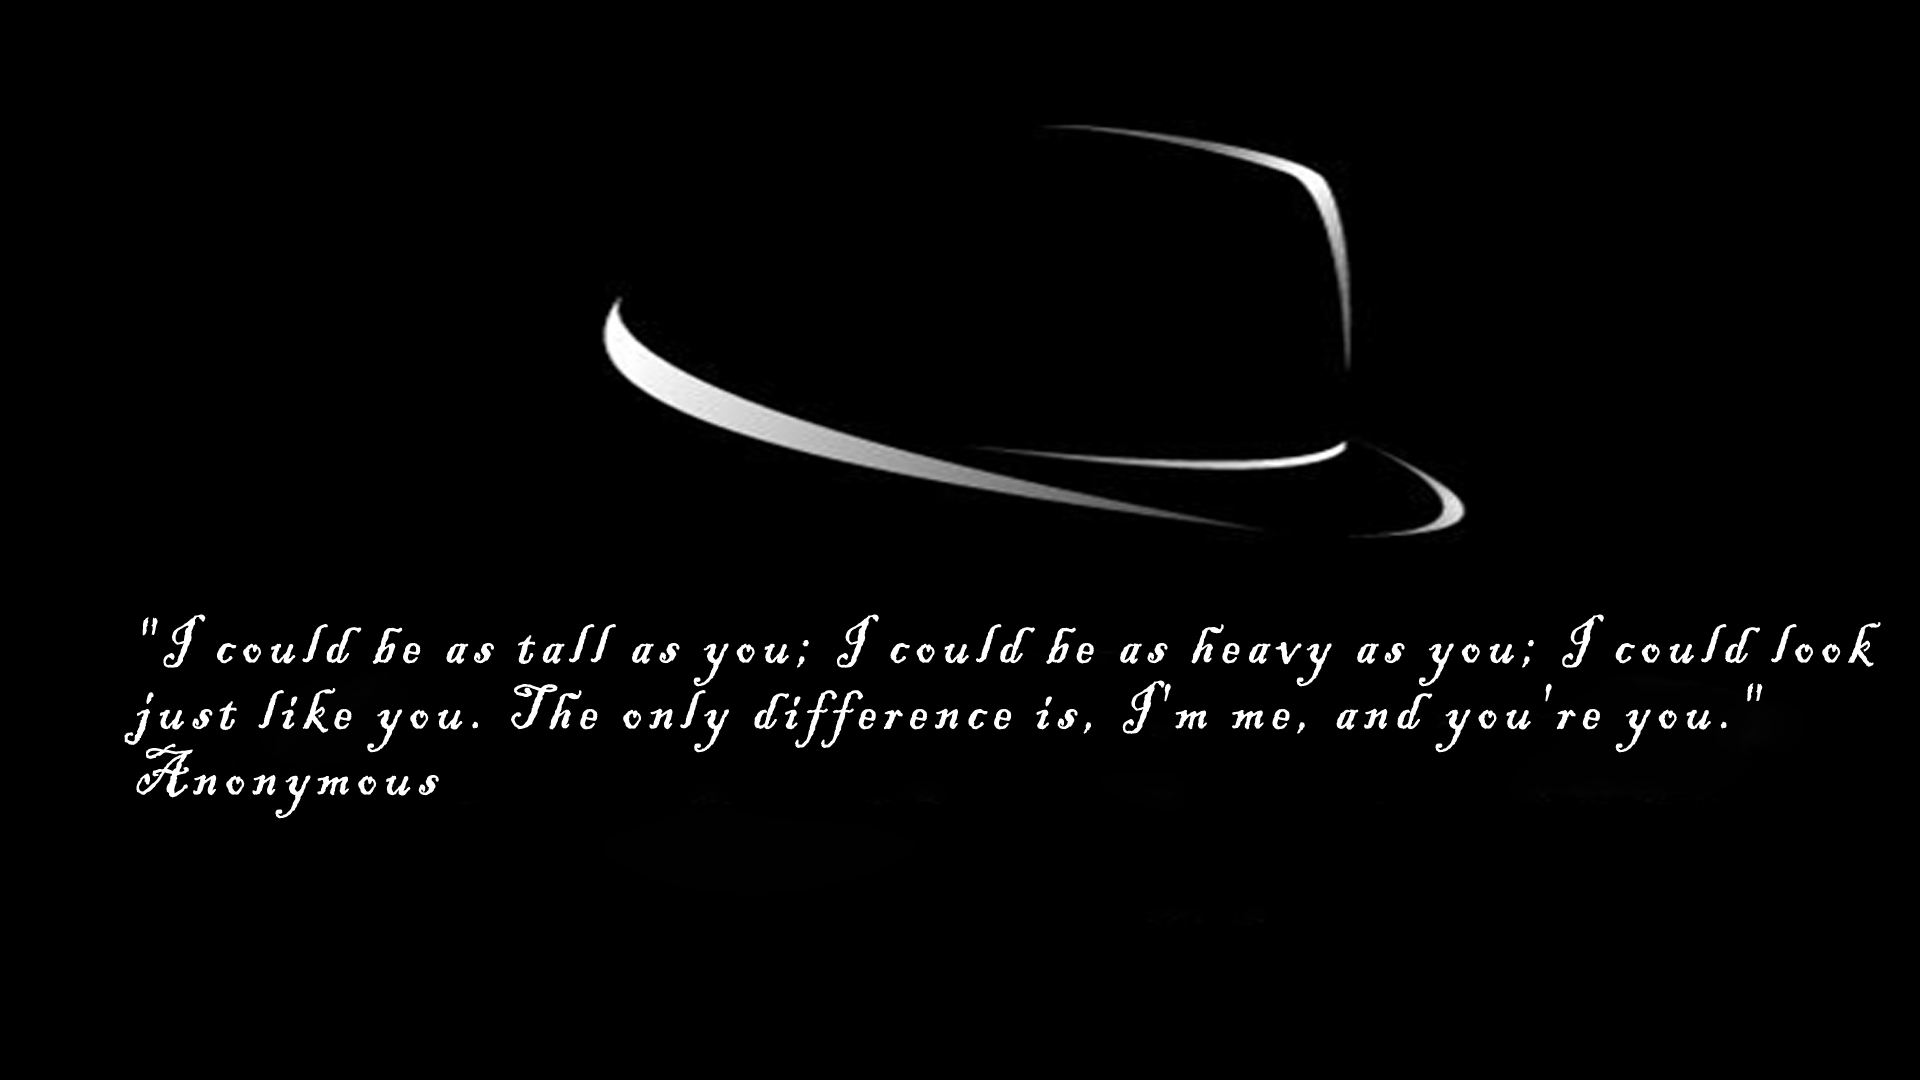 Space Wallpaper on Anonymous Quotes Hd Wallpaper   General   728017